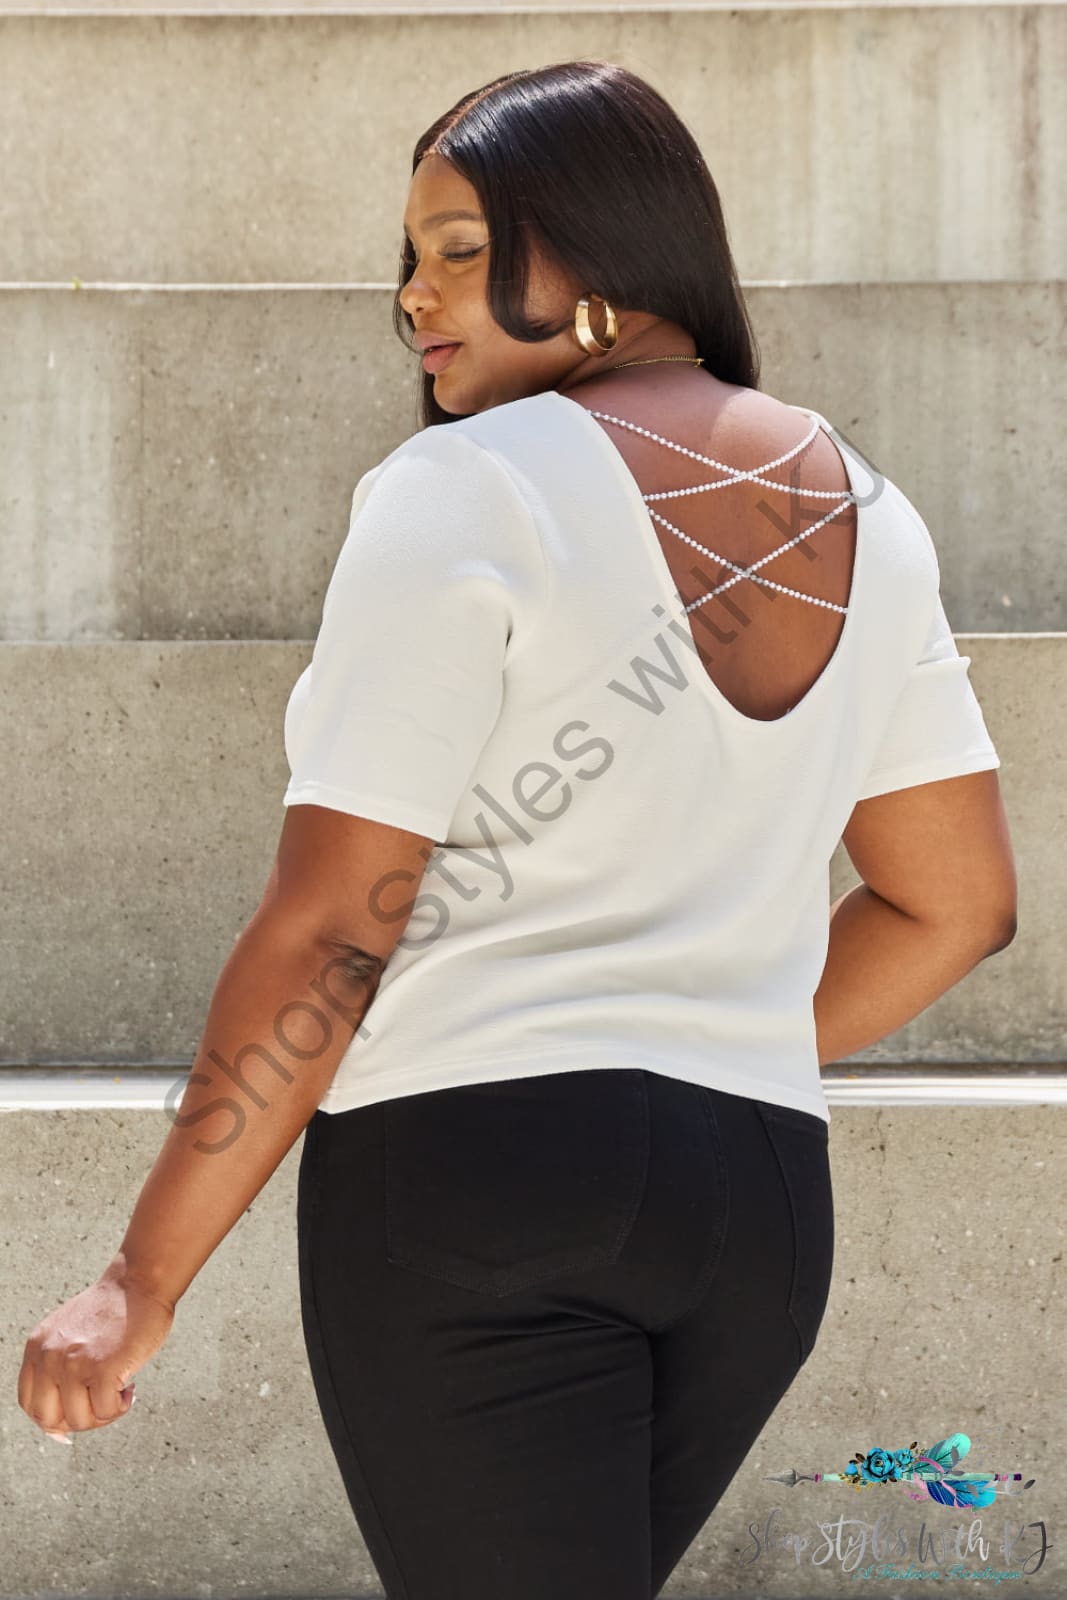 Pearly White Criss Cross Pearl Detail Open Back T-Shirt Shirts & Tops